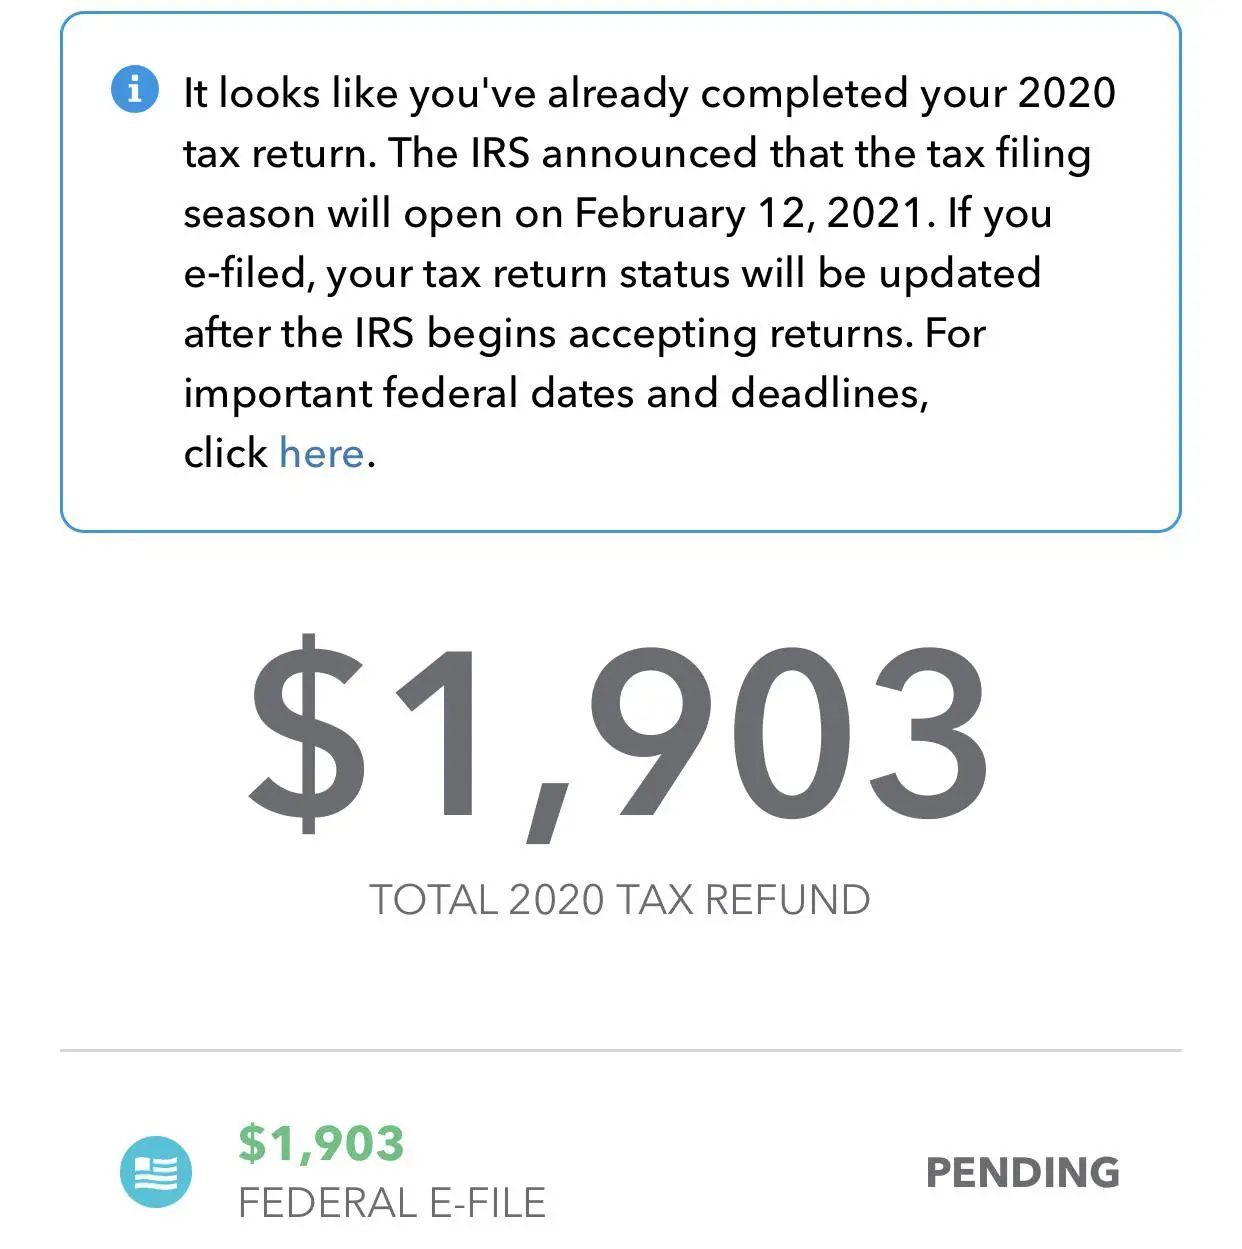 Finally after being patient, filing my 2020 taxes made me eligible for ...